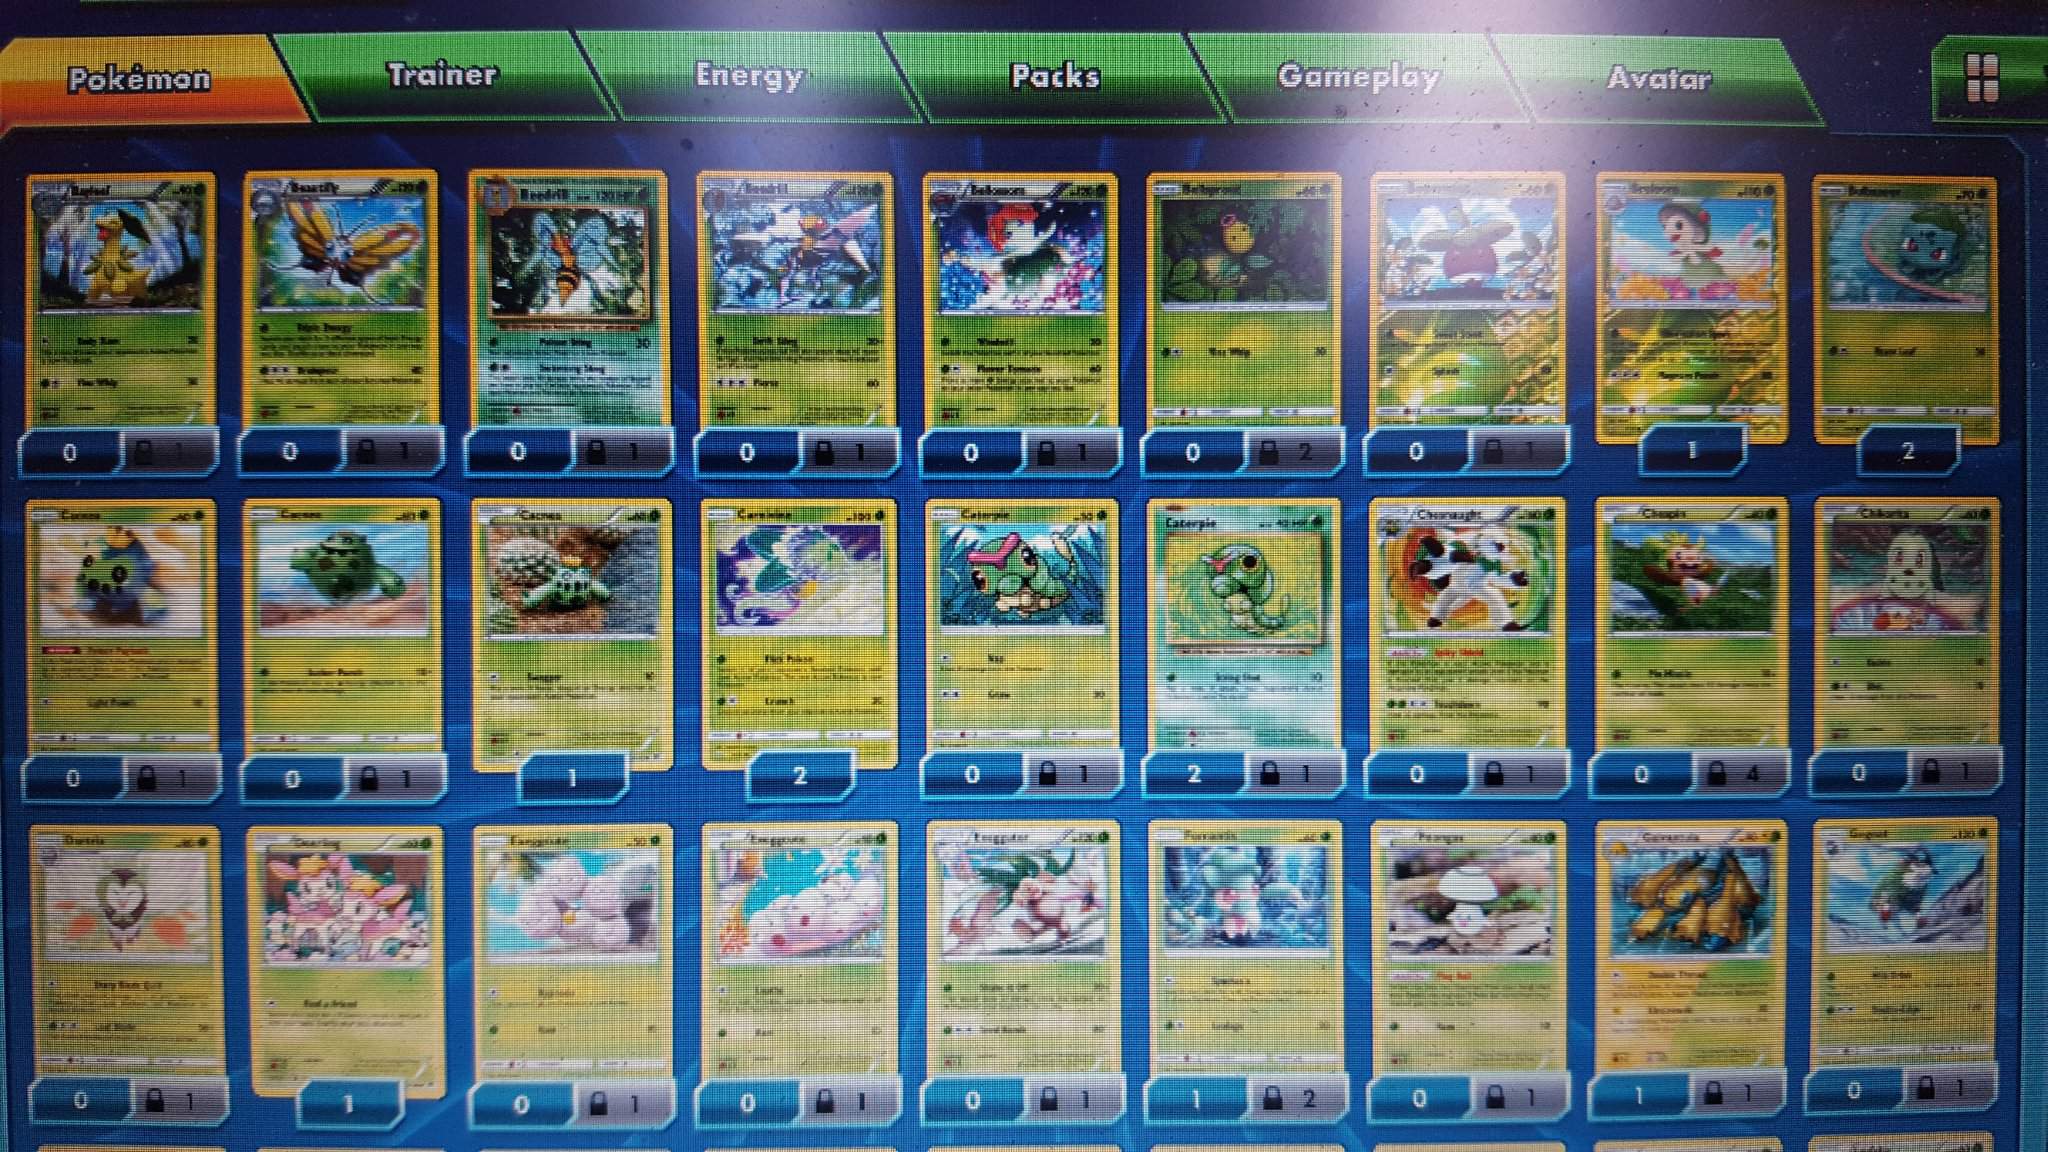 Grass Cards i can use for a grass type deck Pokémon Trading Card Game